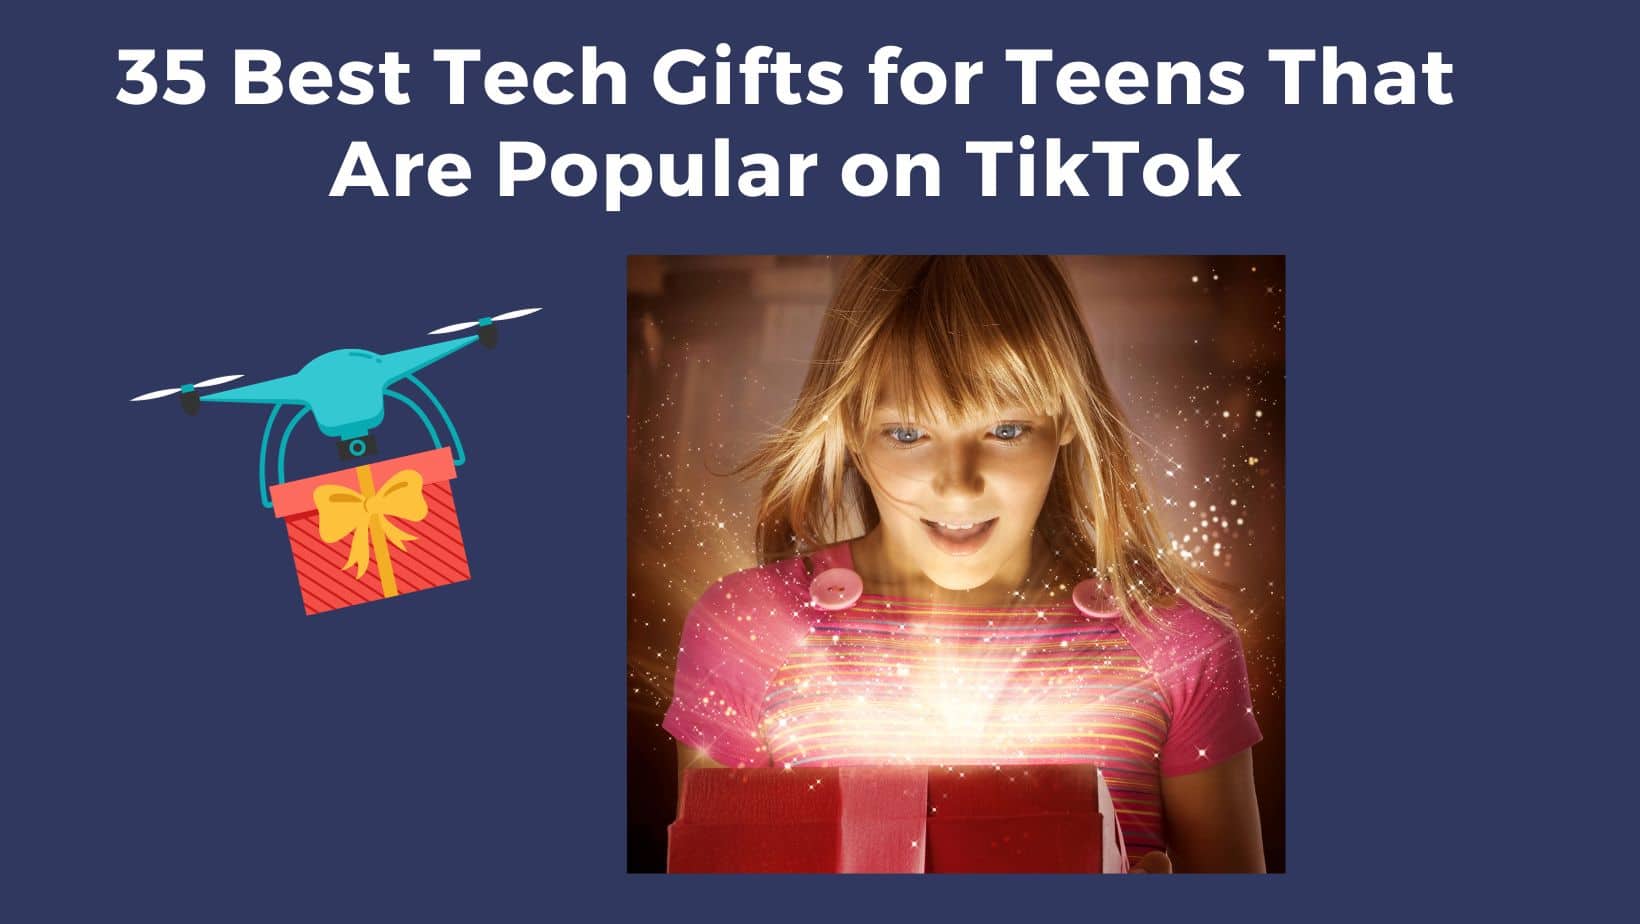 All the best tech gifts for teens 2022. A parents guide